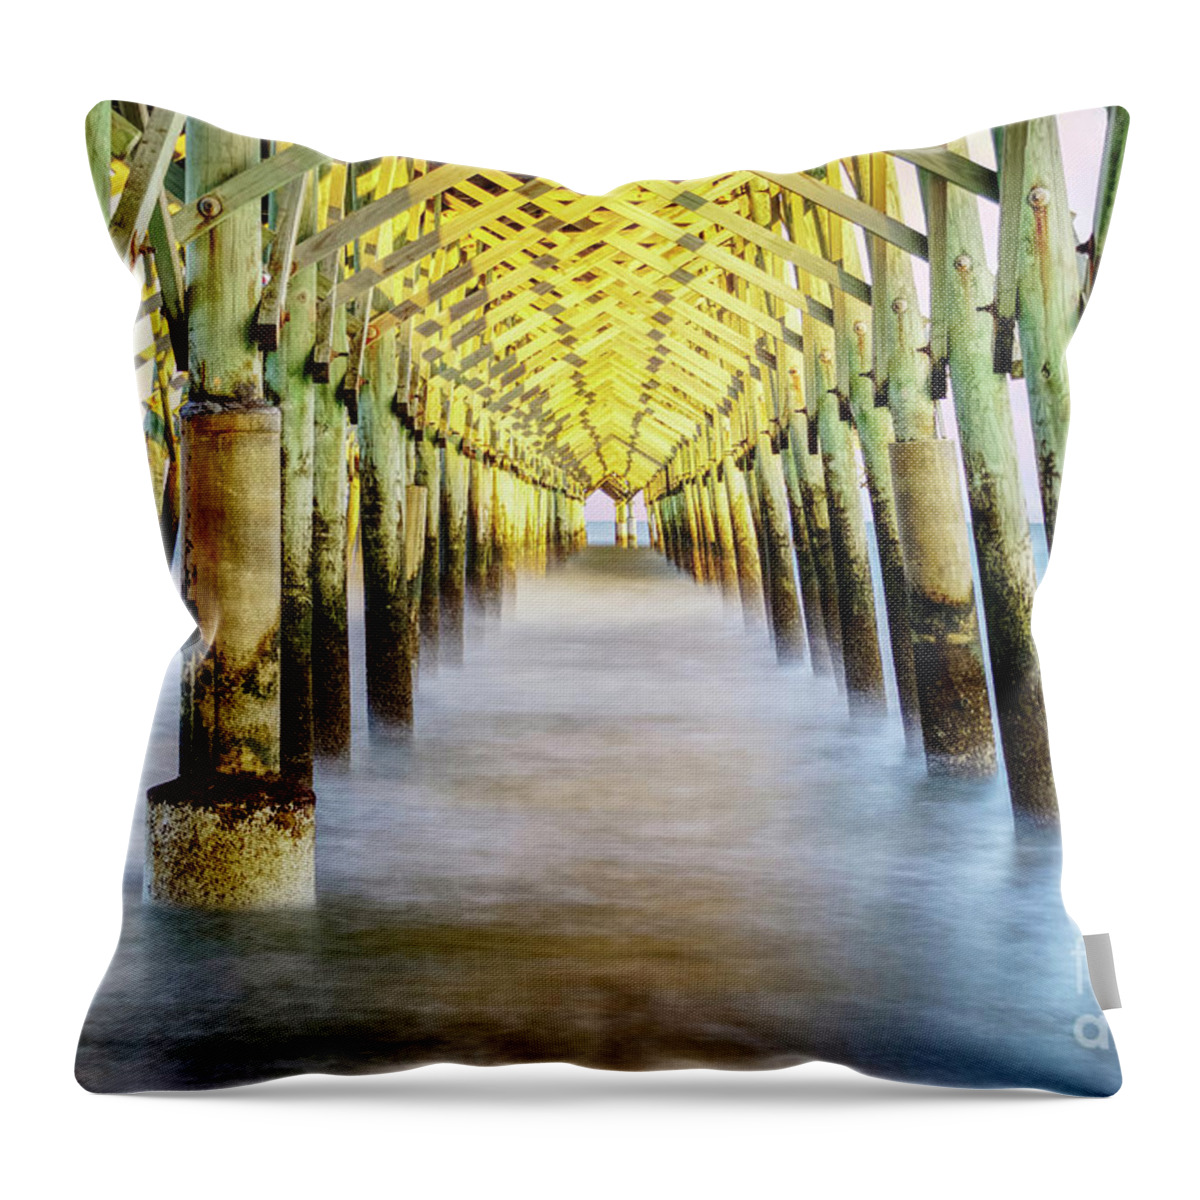 Folly Beach Throw Pillow featuring the photograph Ghostly Waves Under Folly Beach Pier by Jennifer White